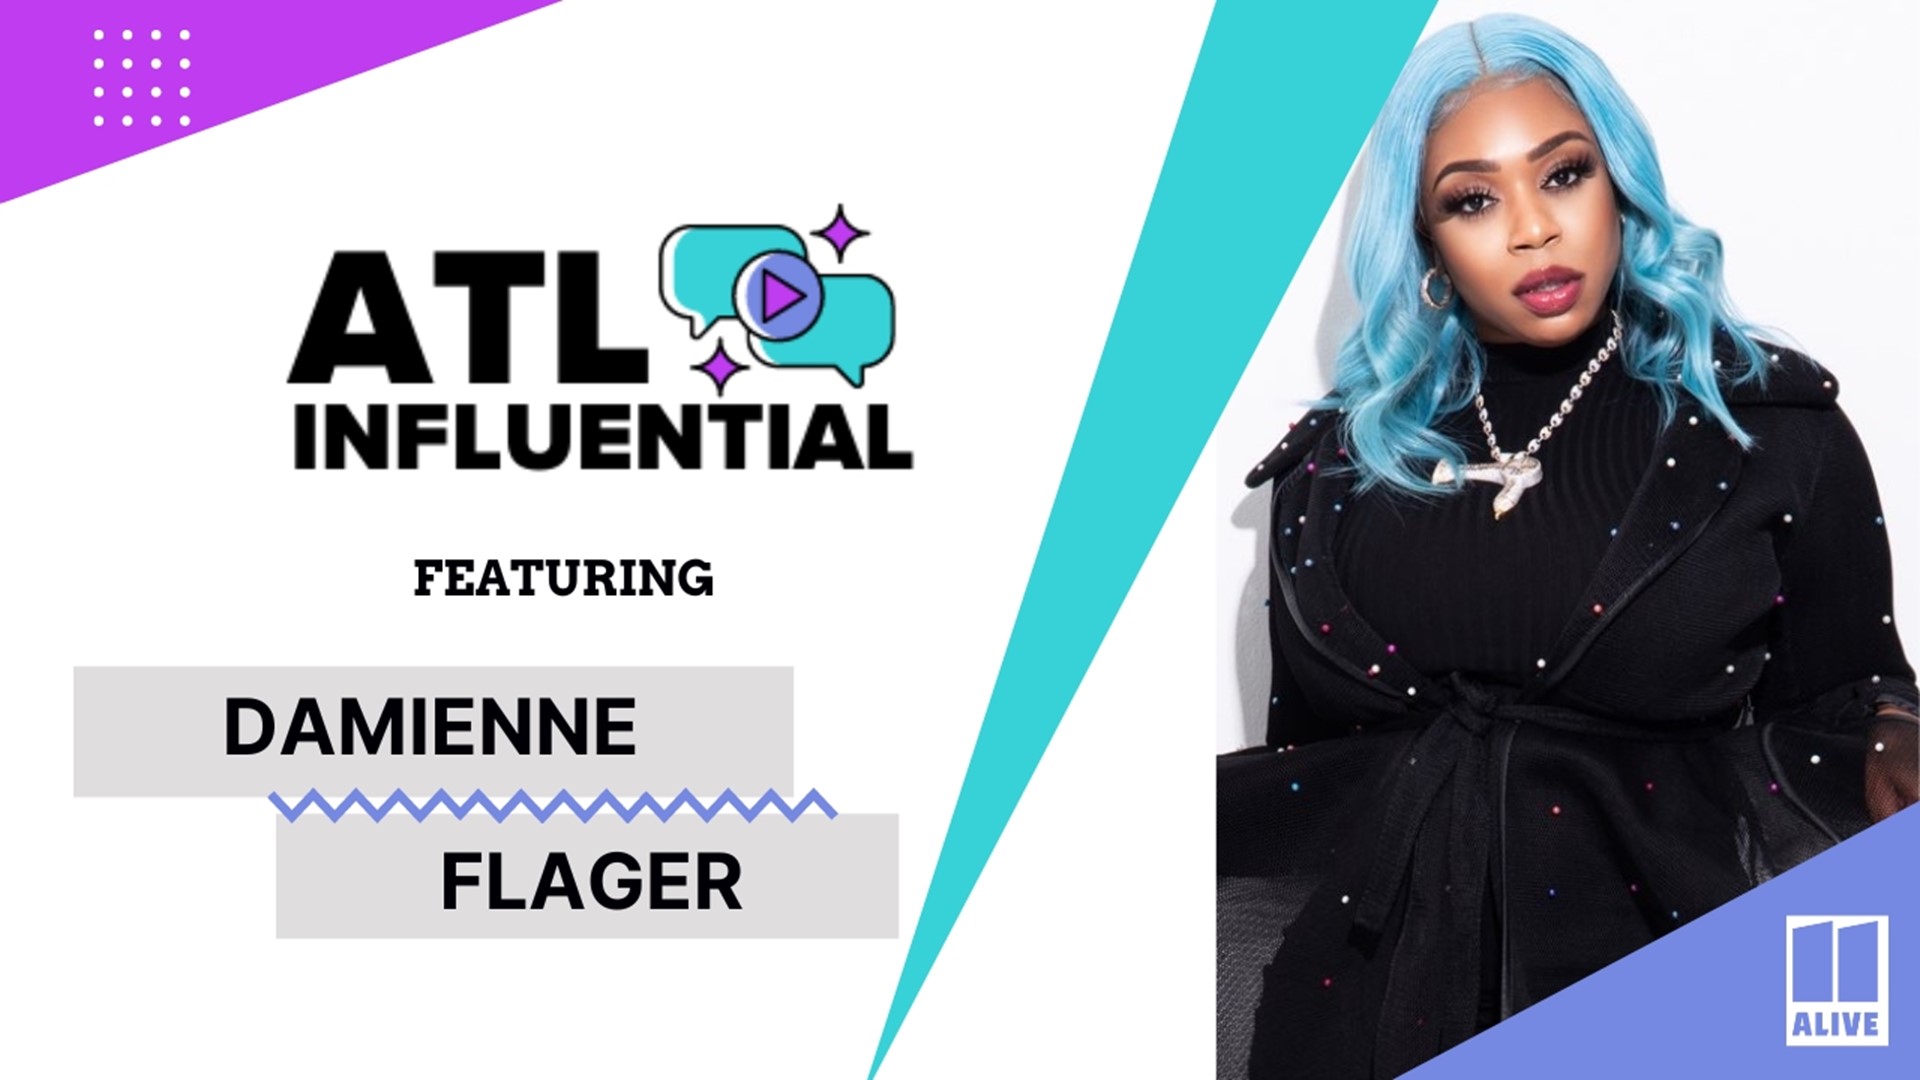 ATL Influential host Tianne Johnson chats with hairstylist, educator, and influencer Damienne Flager about her path to becoming a business mogul.